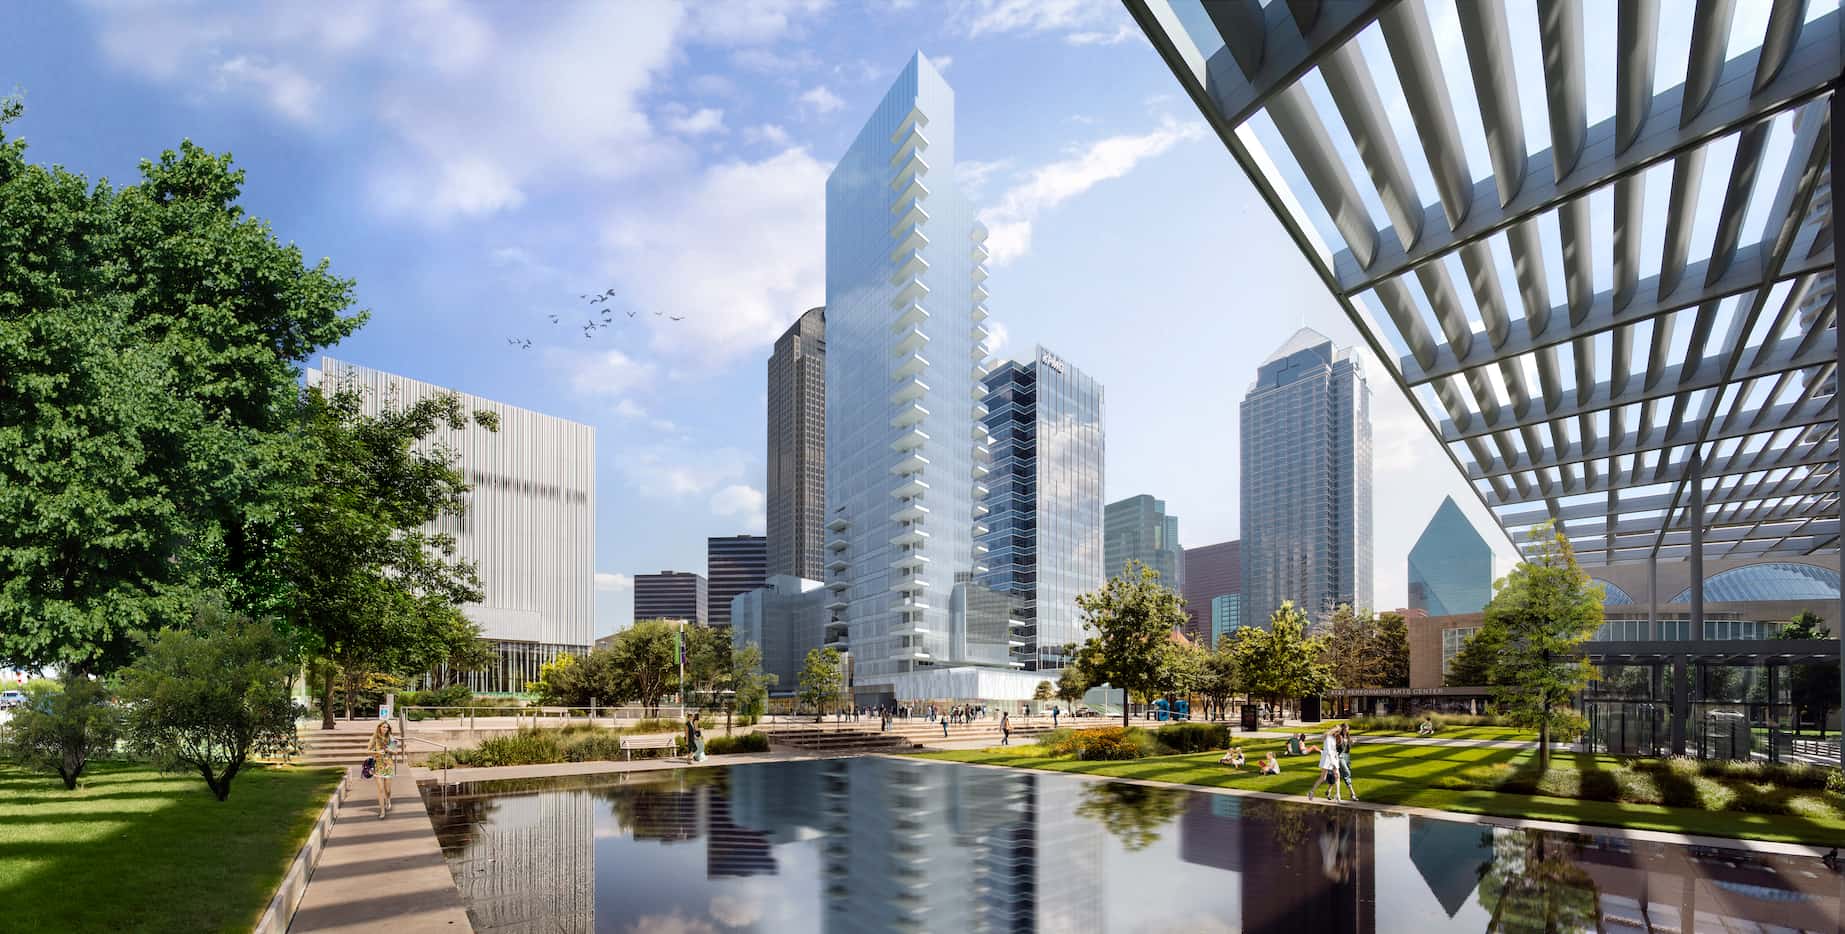 The 28-story high-rise is in downtown Dallas' Arts District.